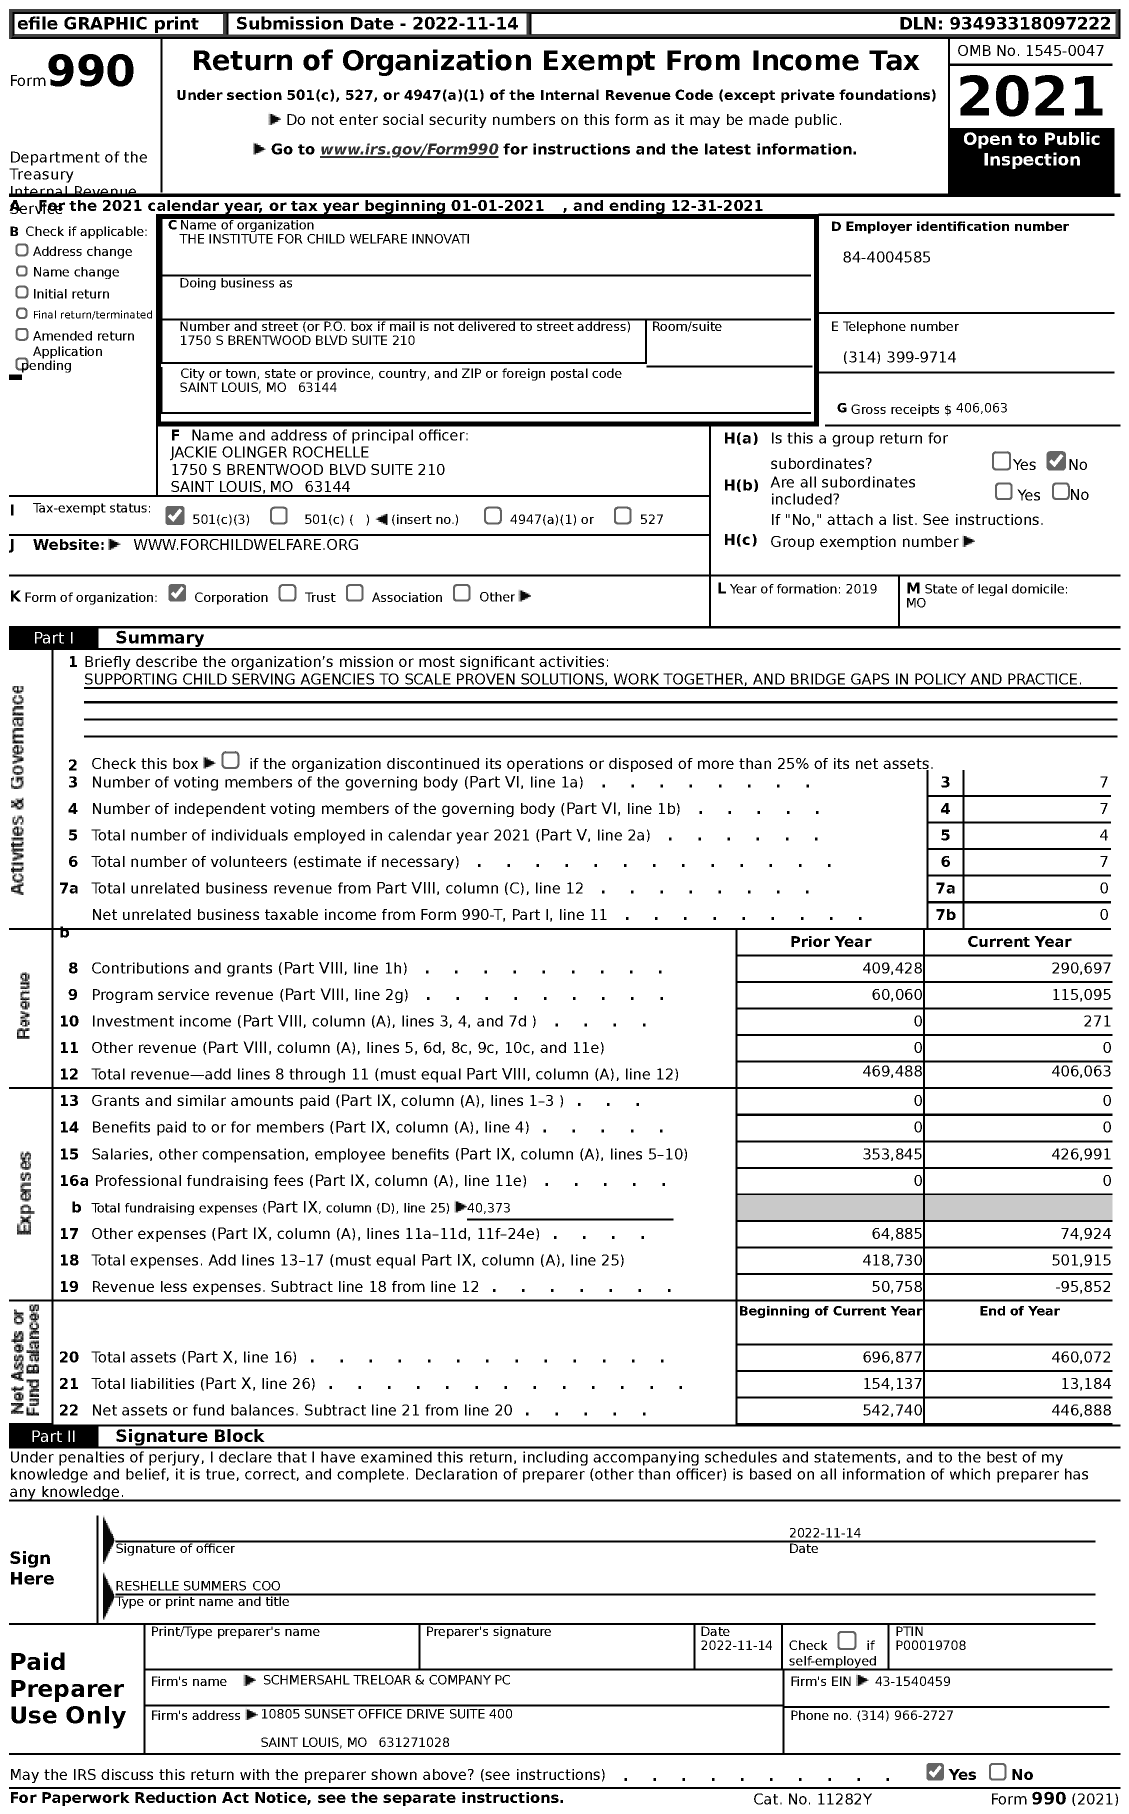 Image of first page of 2021 Form 990 for The Institute for Child Welfare Innovation